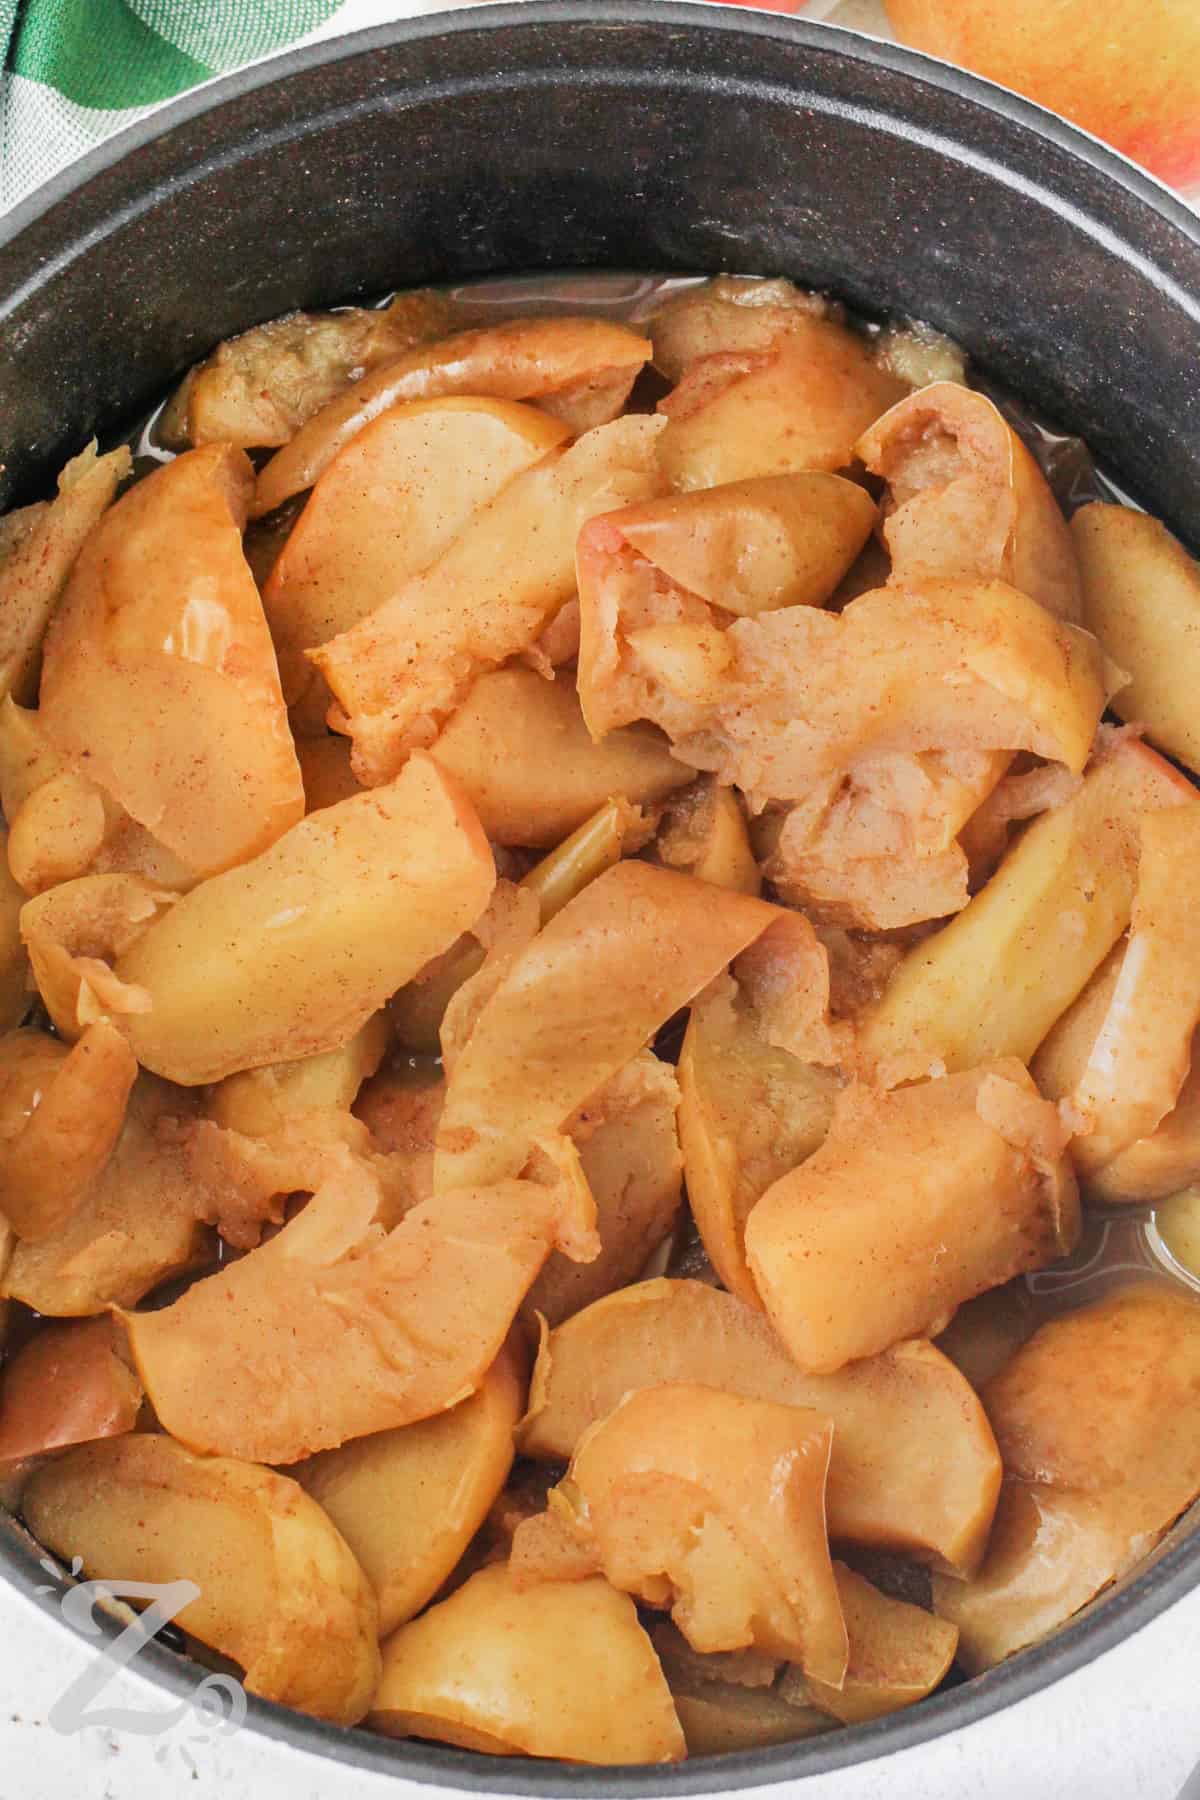 apples simmered in a pot to make homemade apple sauce